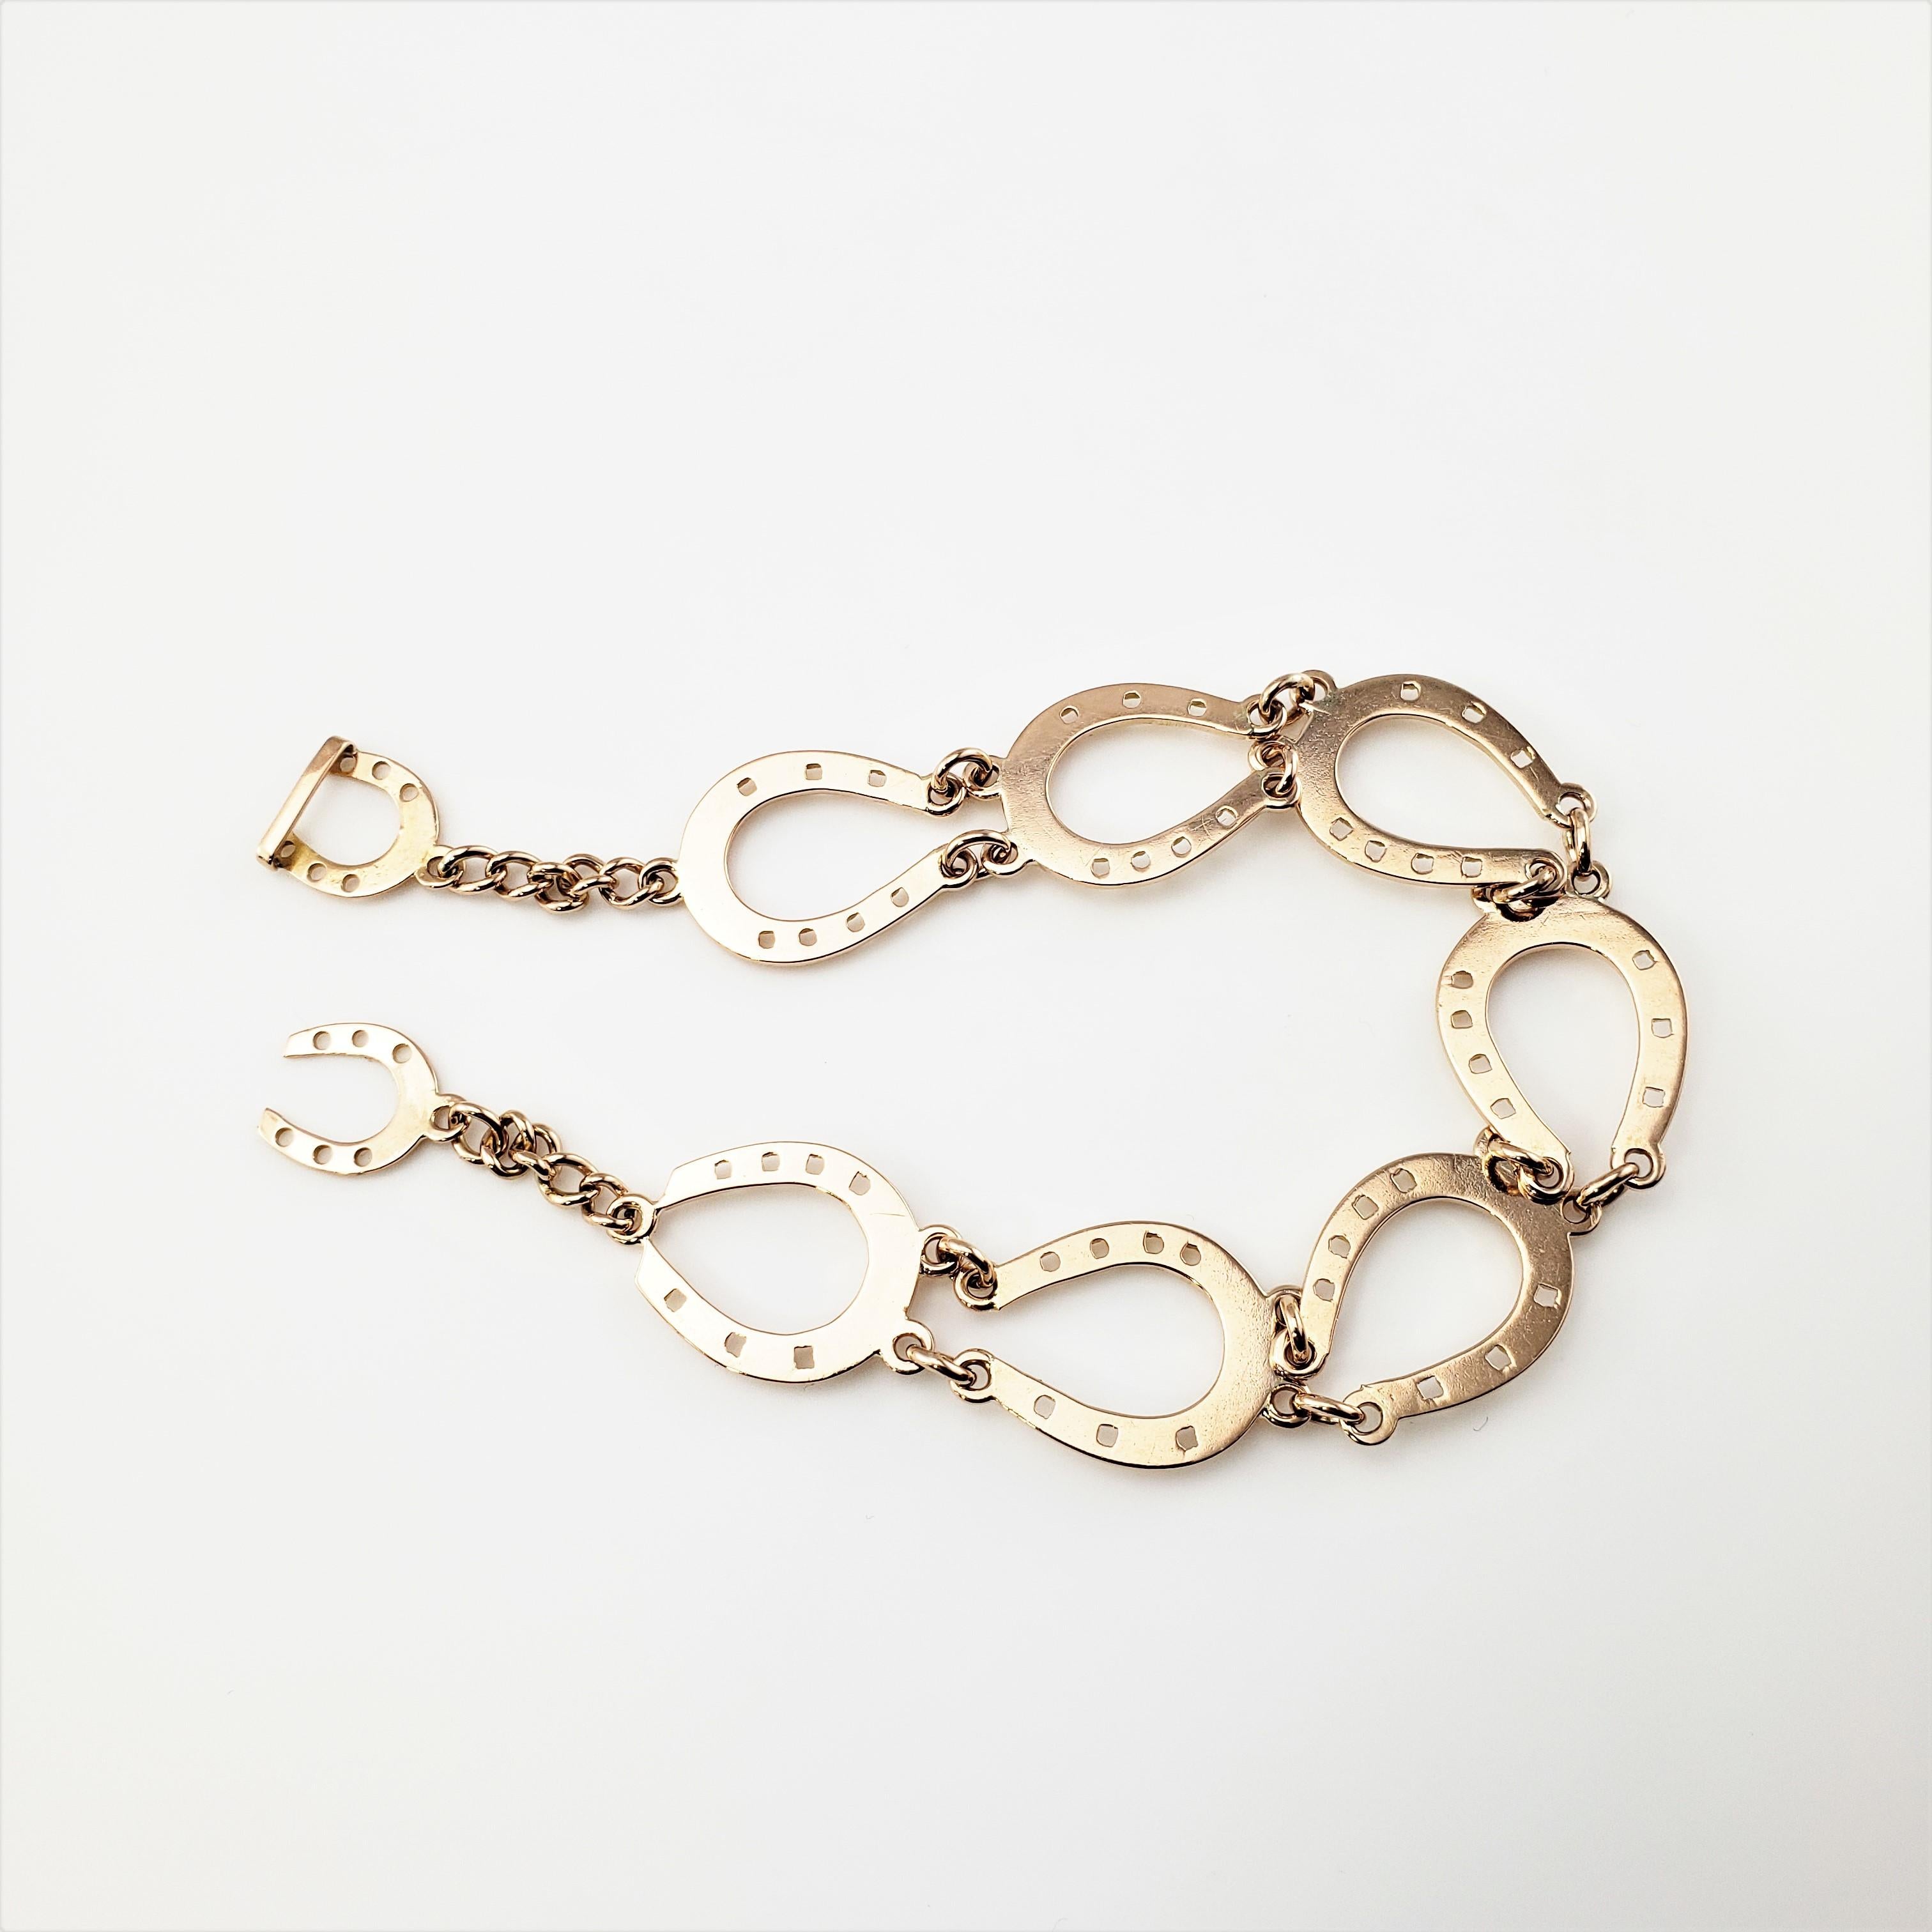 14 Karat Rose Gold Horse Shoe Bracelet-

This stunning horse shoe bracelet features is crafted in beautifully detailed 14K rose gold.  Width:  15 mm.

Size: 7 inches

Weight:  9.8 dwt. /  15.3 gr.

Tested for 14K gold.

Very good condition,